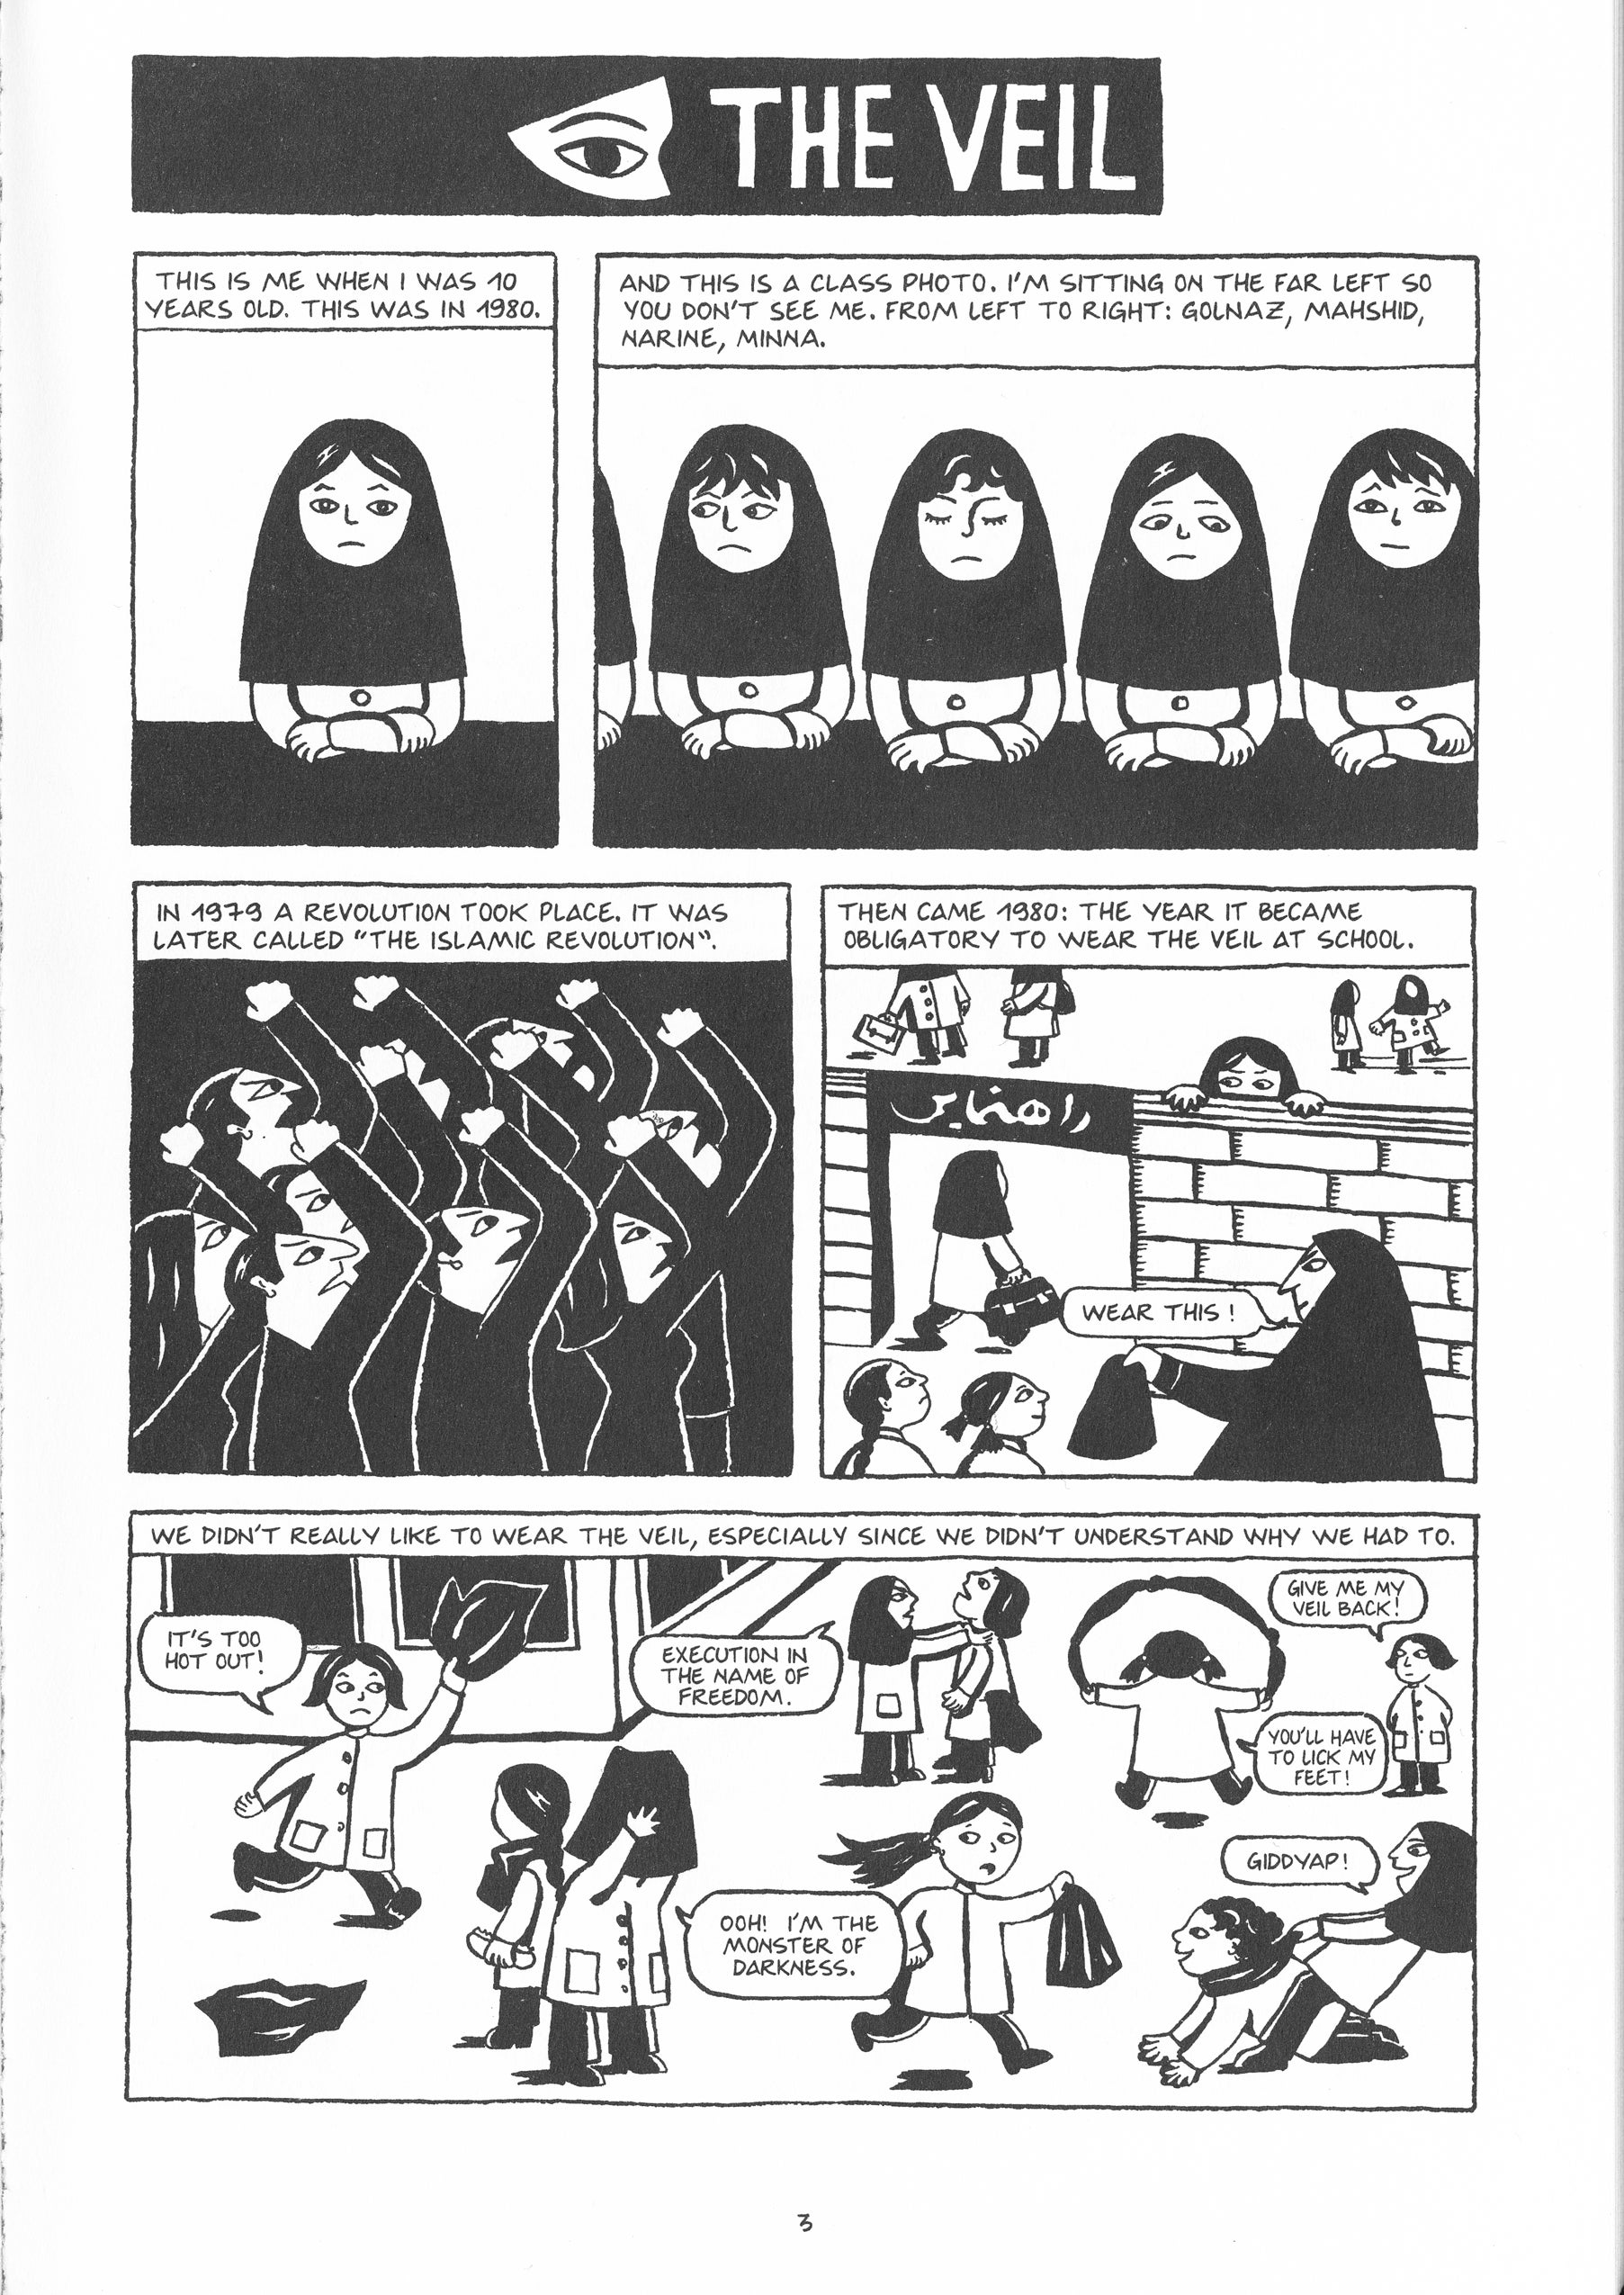 The Complete Persepolis | Knopf Doubleday
